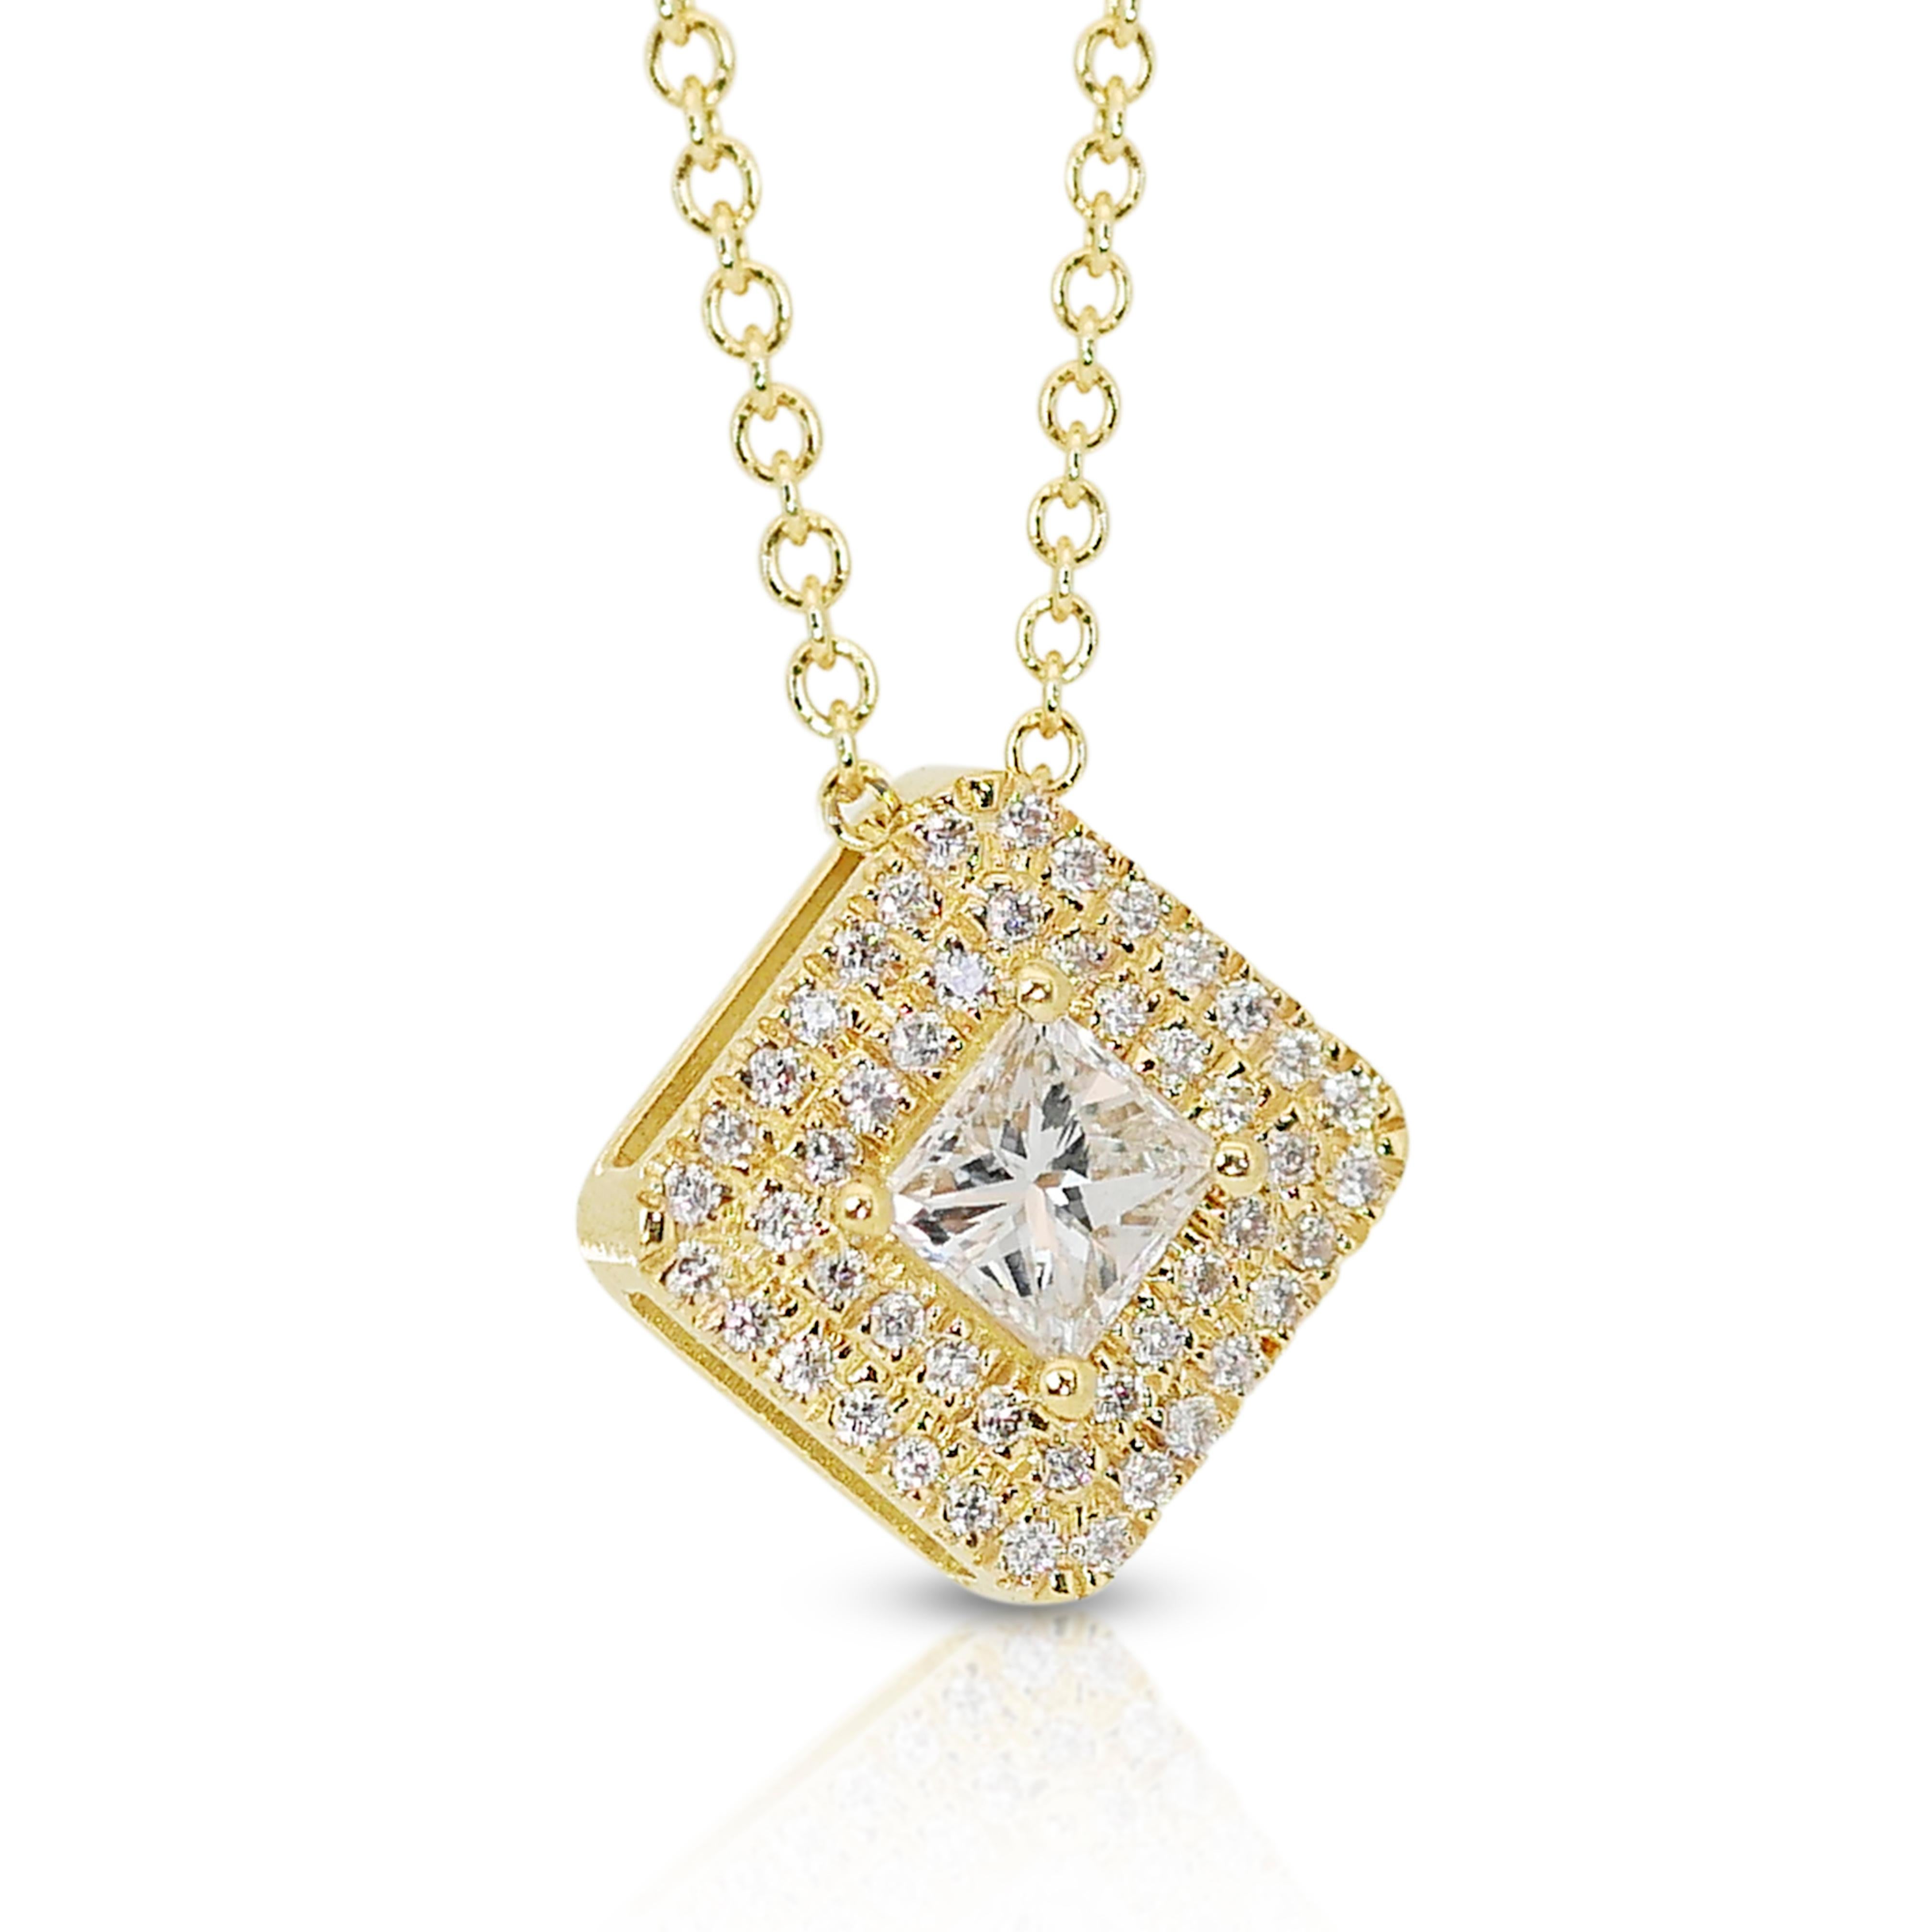 Princess Cut Sophisticated 0.60ct Diamonds Double Halo Necklace in 18k Yellow Gold - IGI Cert For Sale